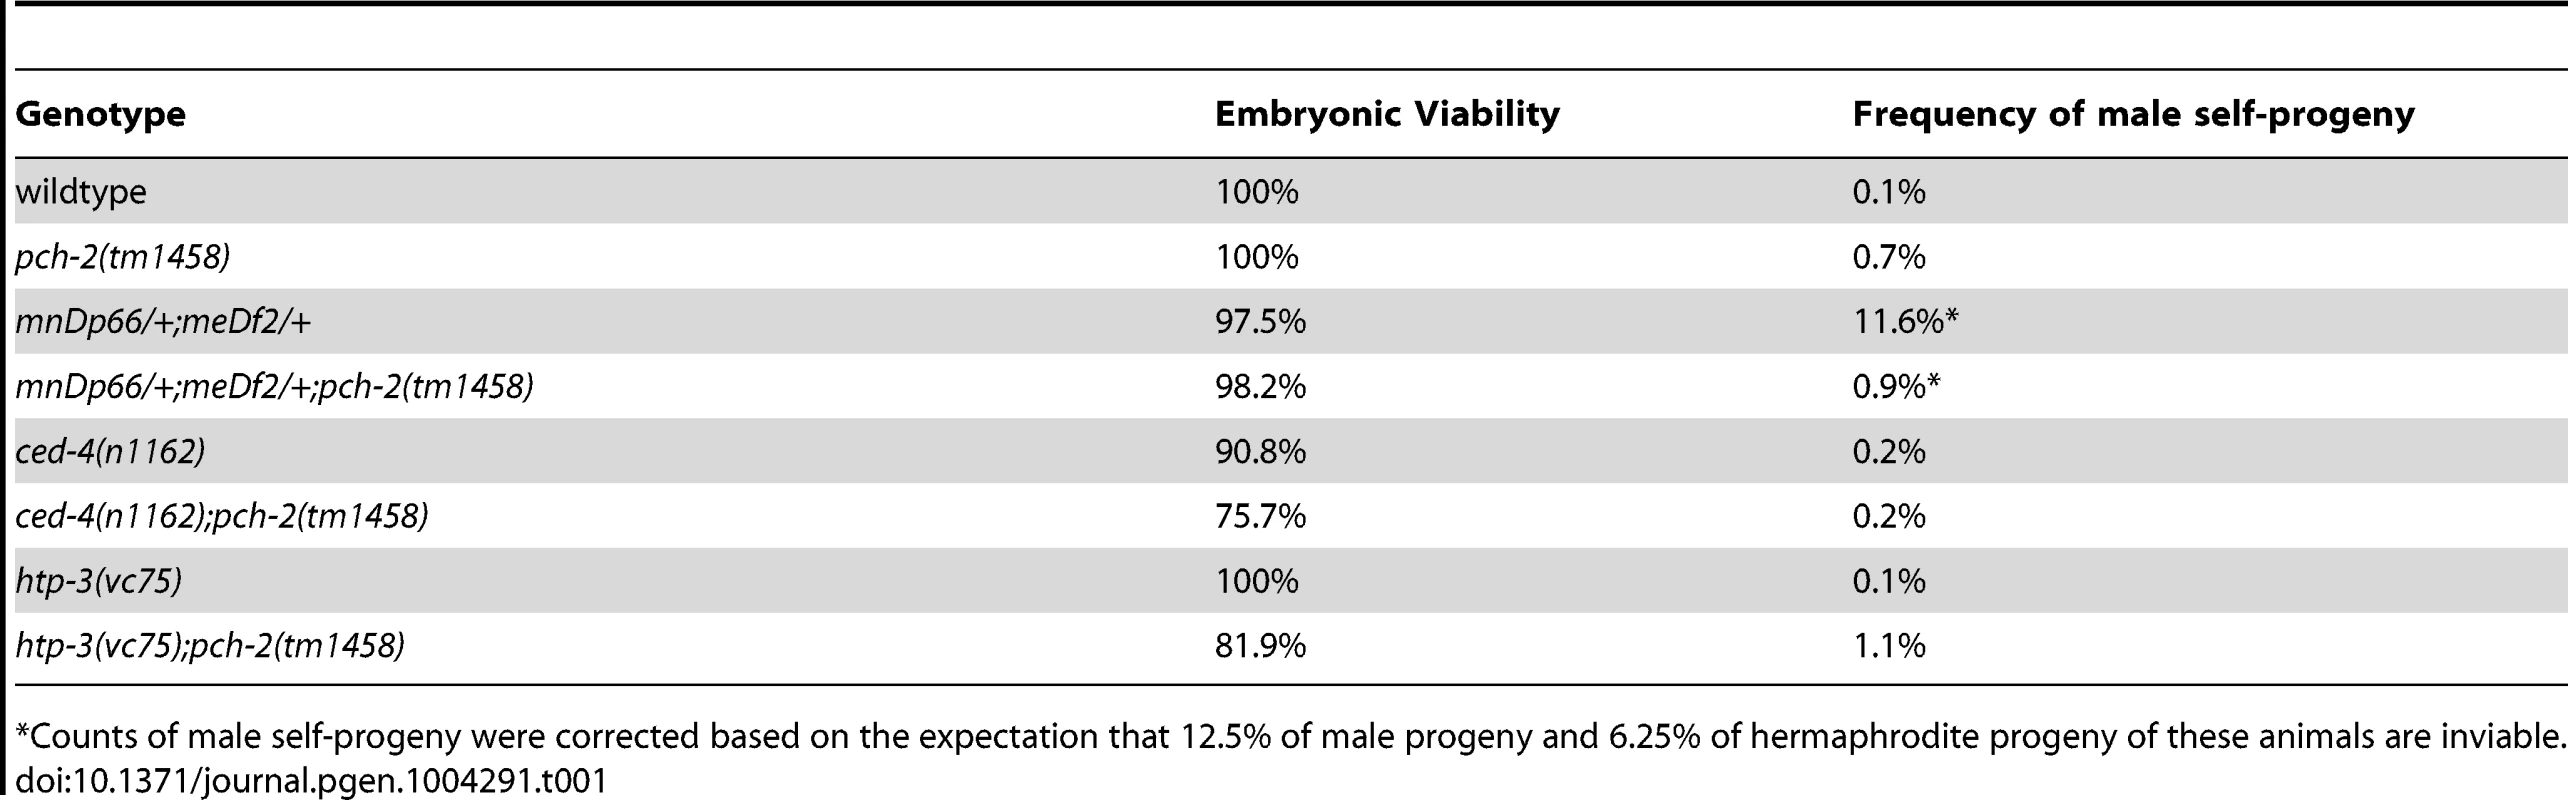 Embryonic viability and frequency of male self-progeny of various mutants.